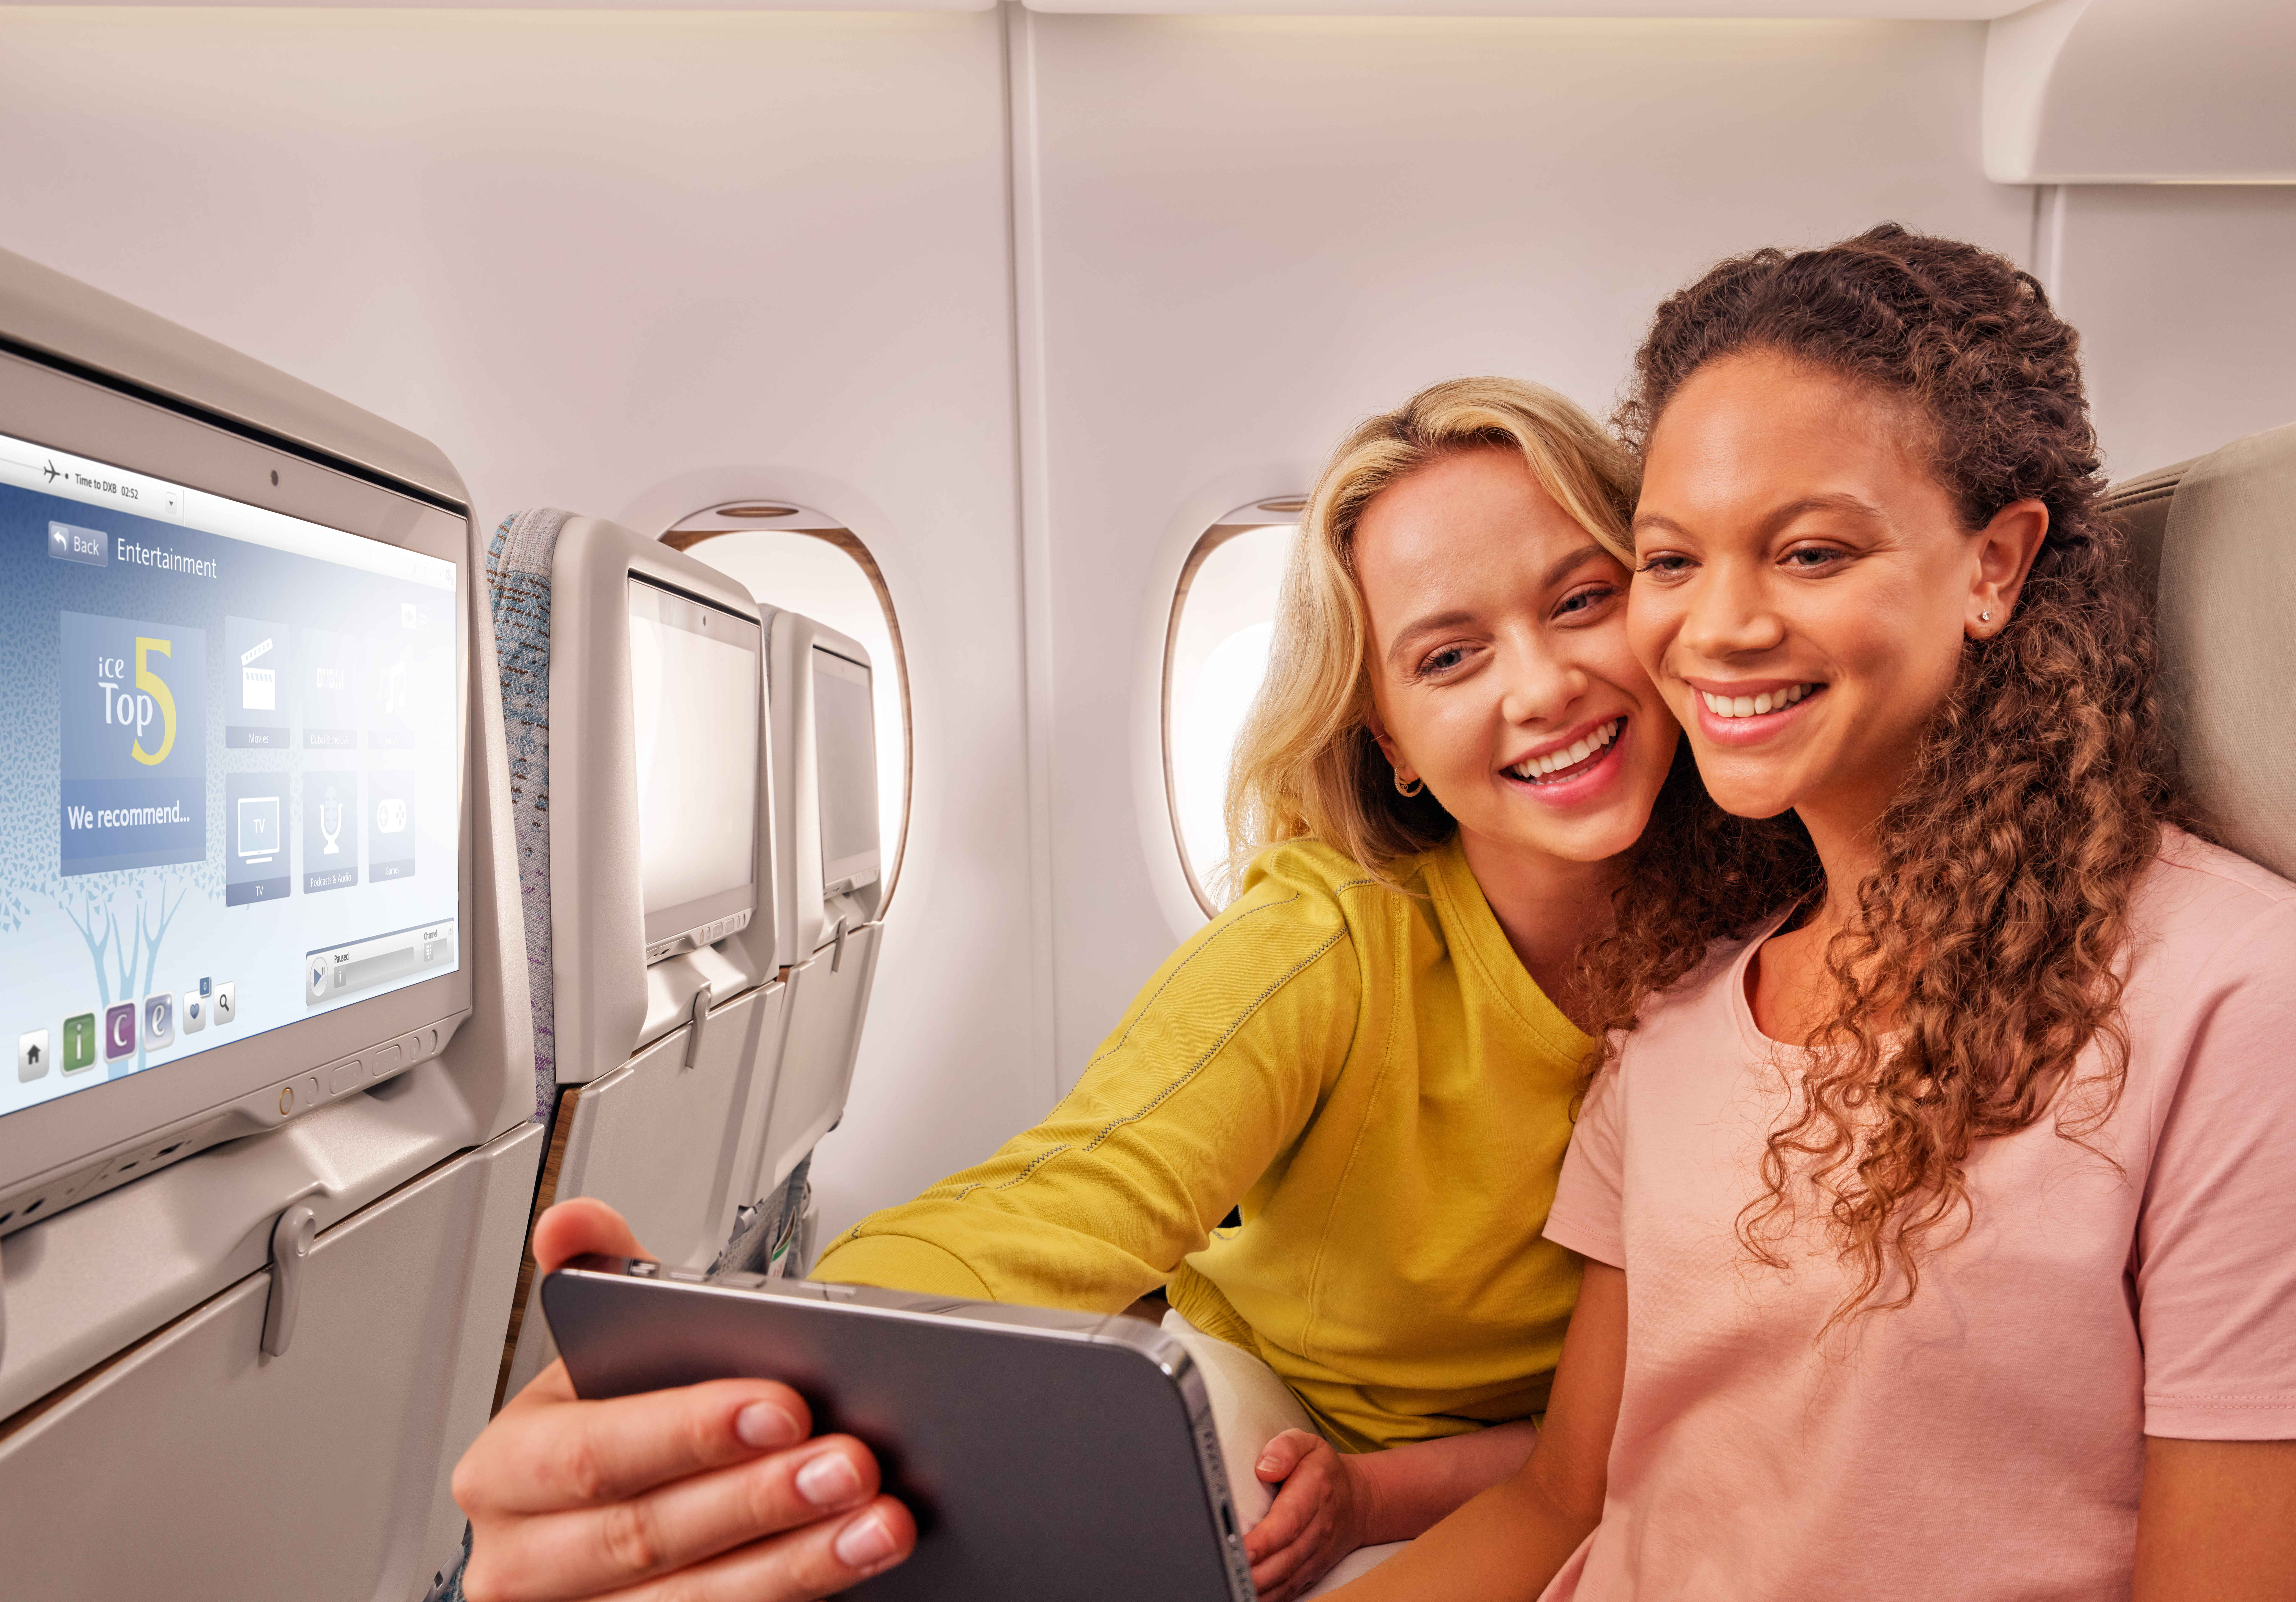 Emirates inflight WiFi offering